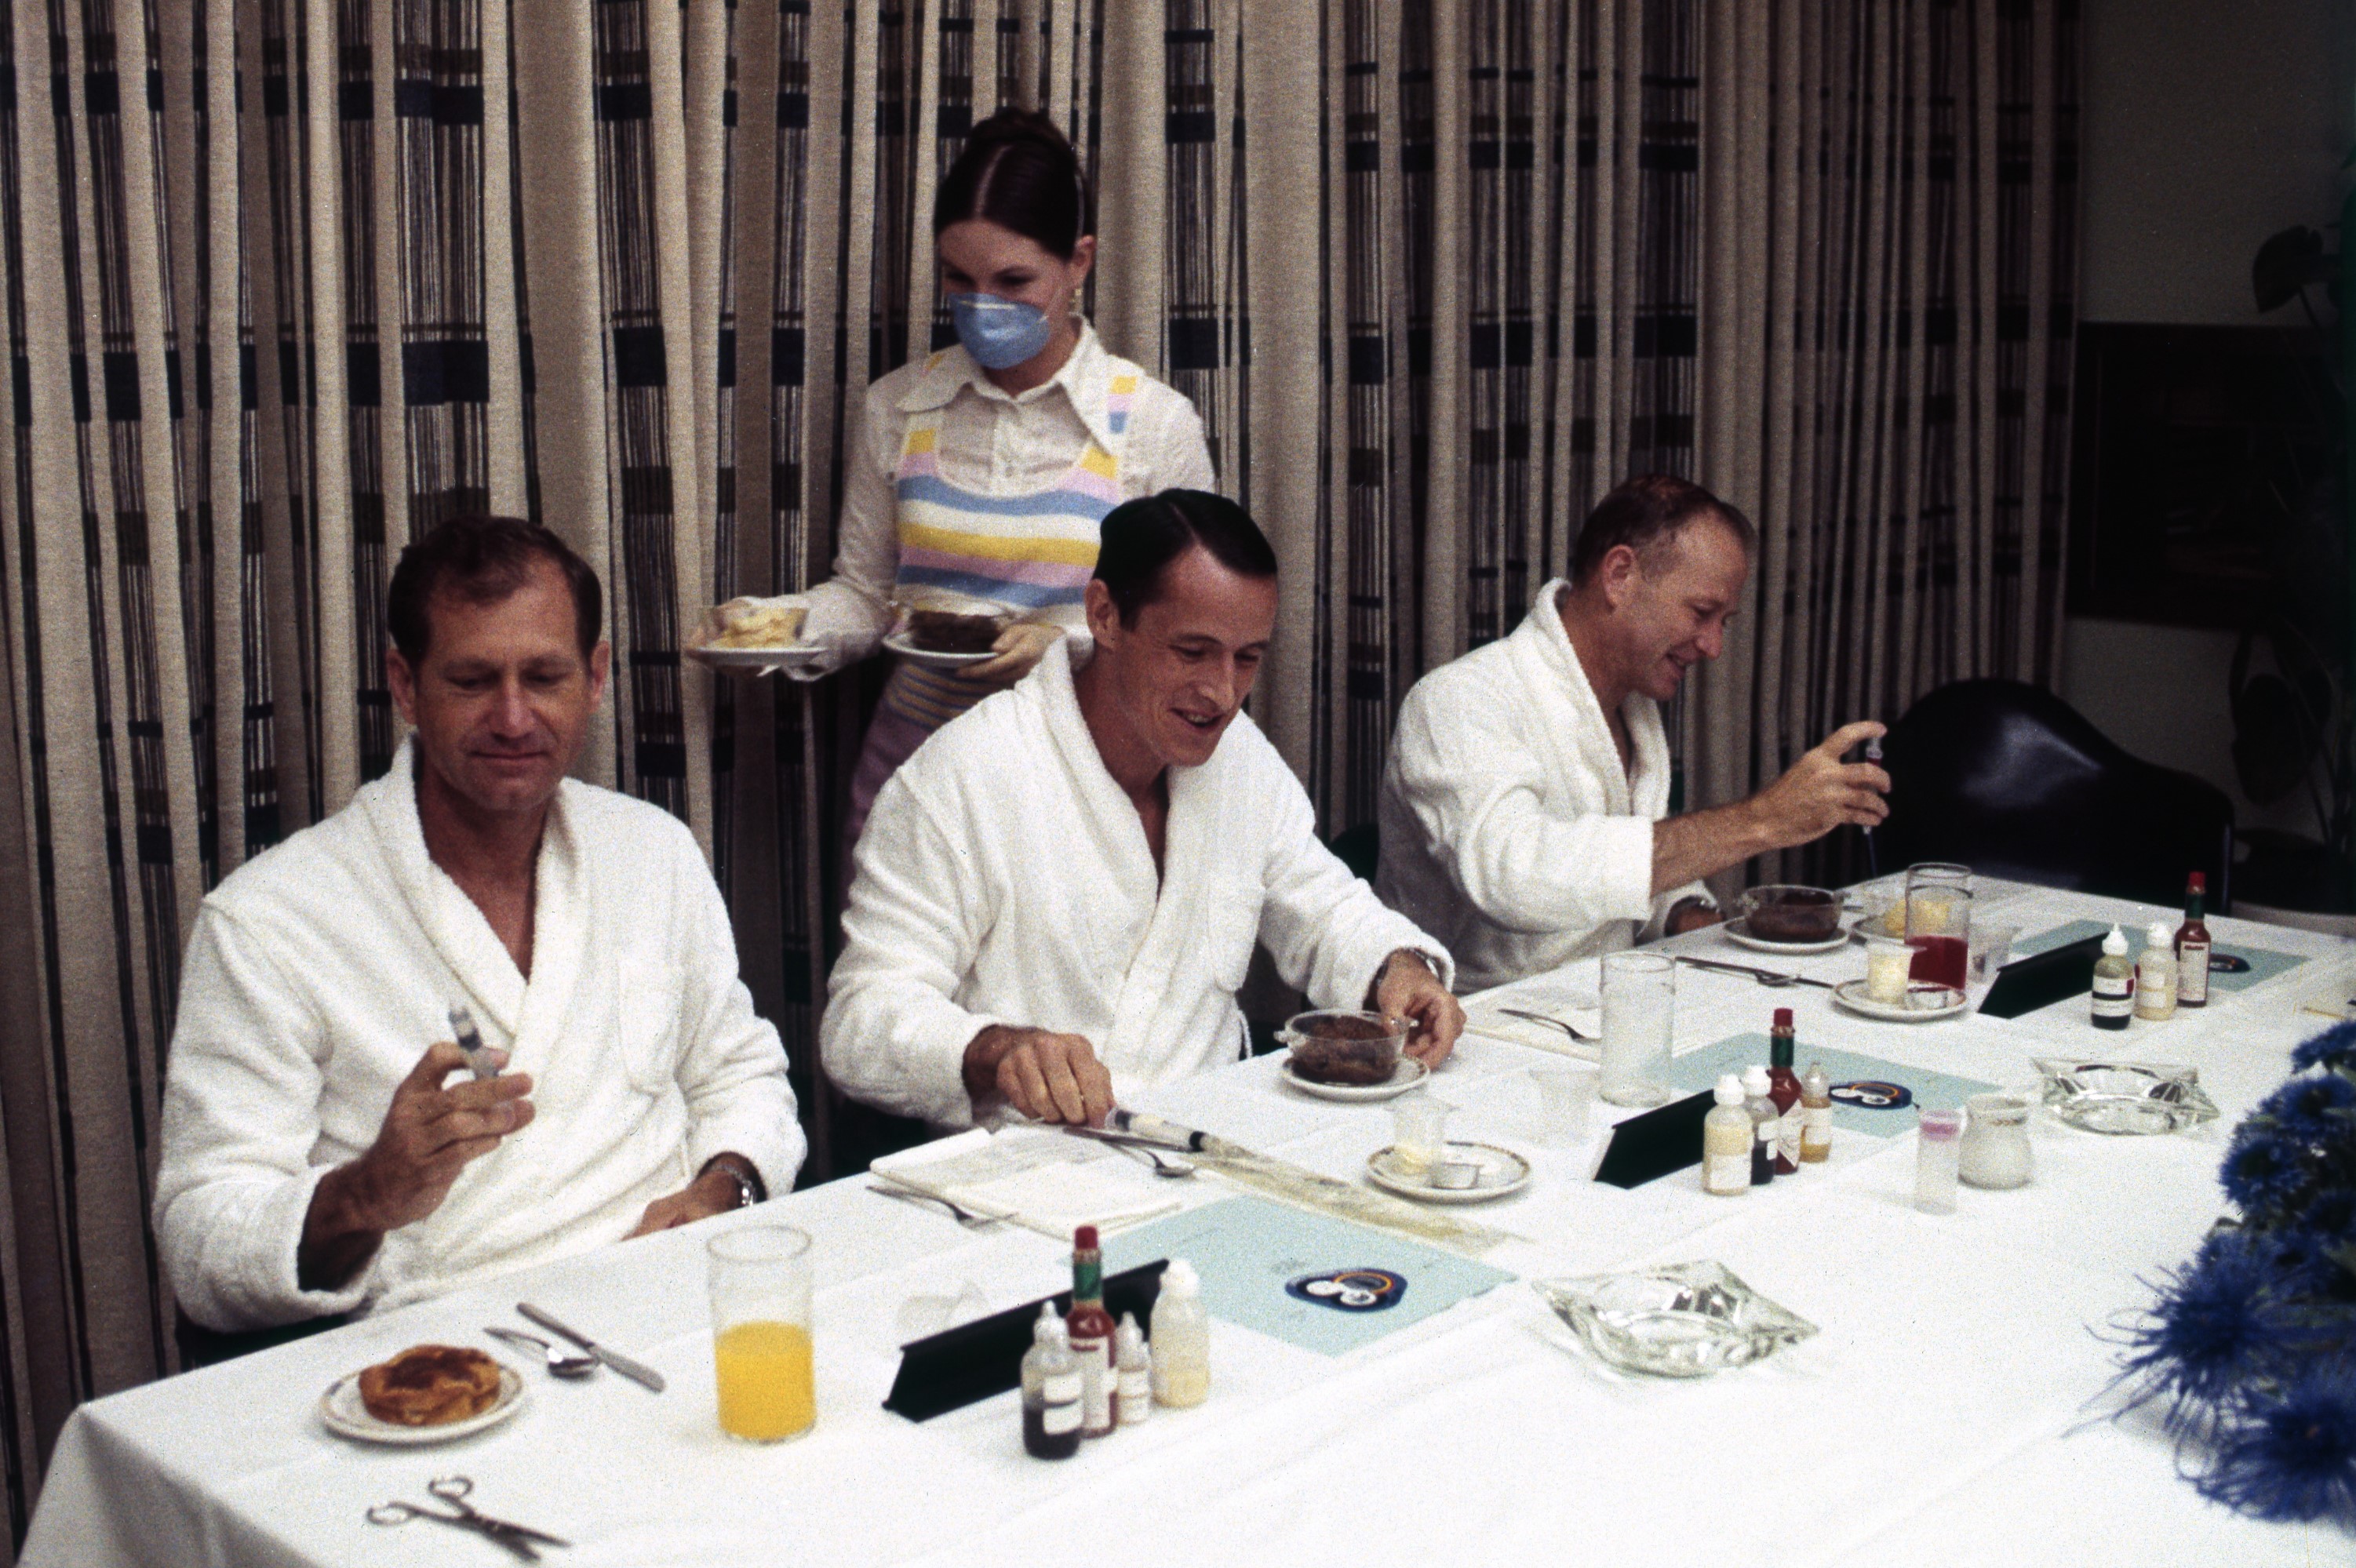 Breaking News Picture of Skylab 4 astronauts William R. Pogue, left, Edward G. Gibson, and Gerald P. Carr make the many of the archaic prelaunch breakfast